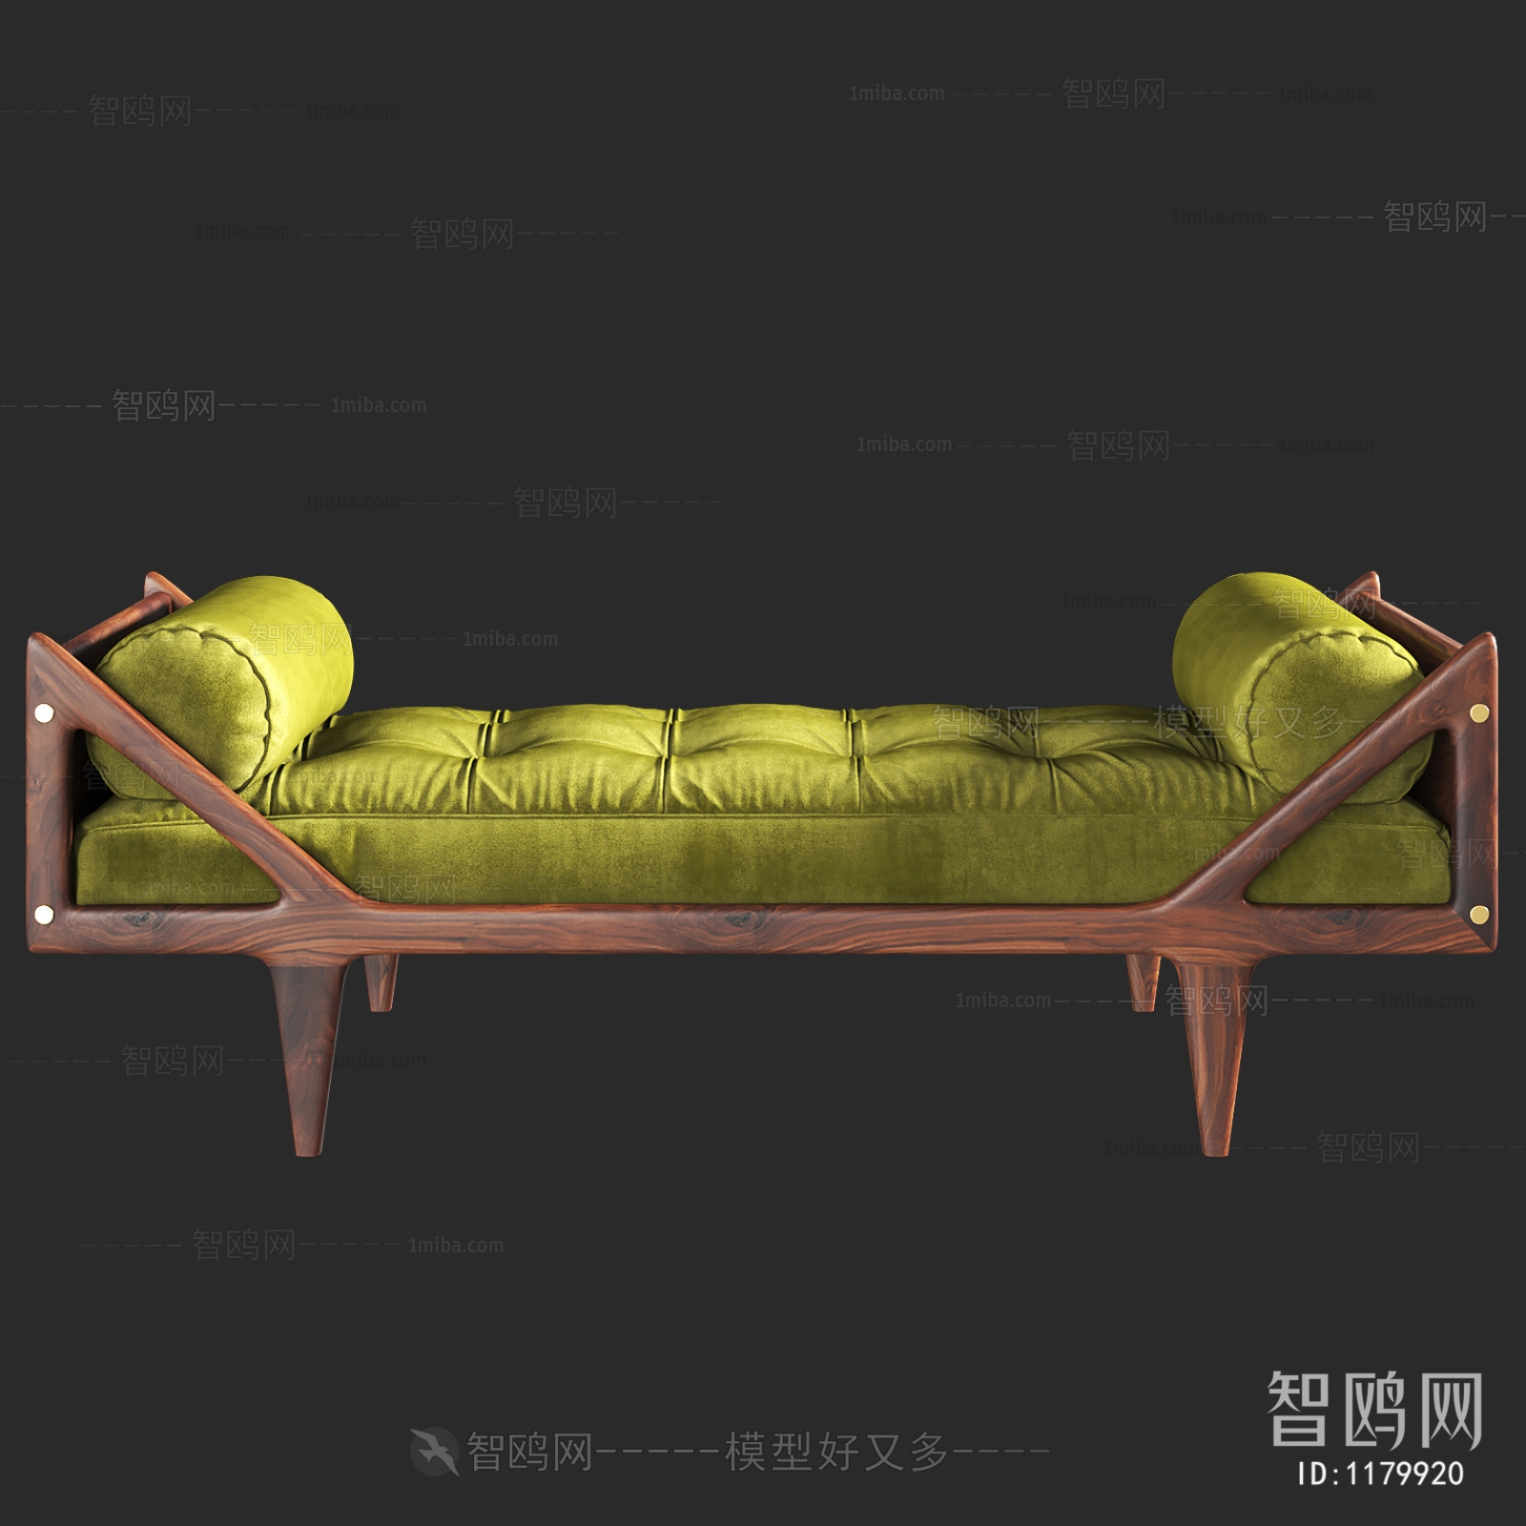 Southeast Asian Style Bench